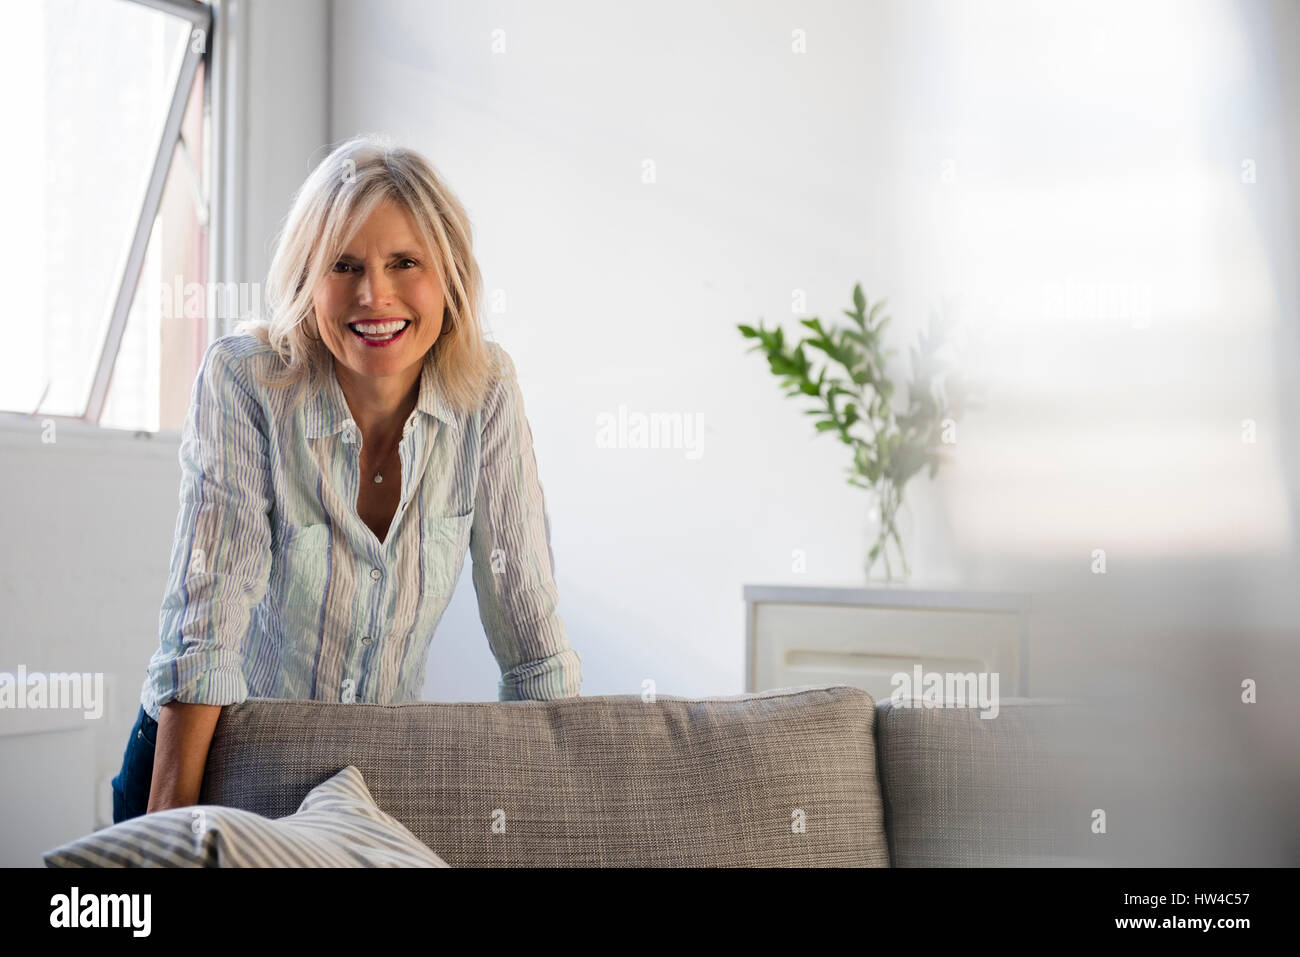 Smiling Caucasian woman leaning on sofa Stock Photo